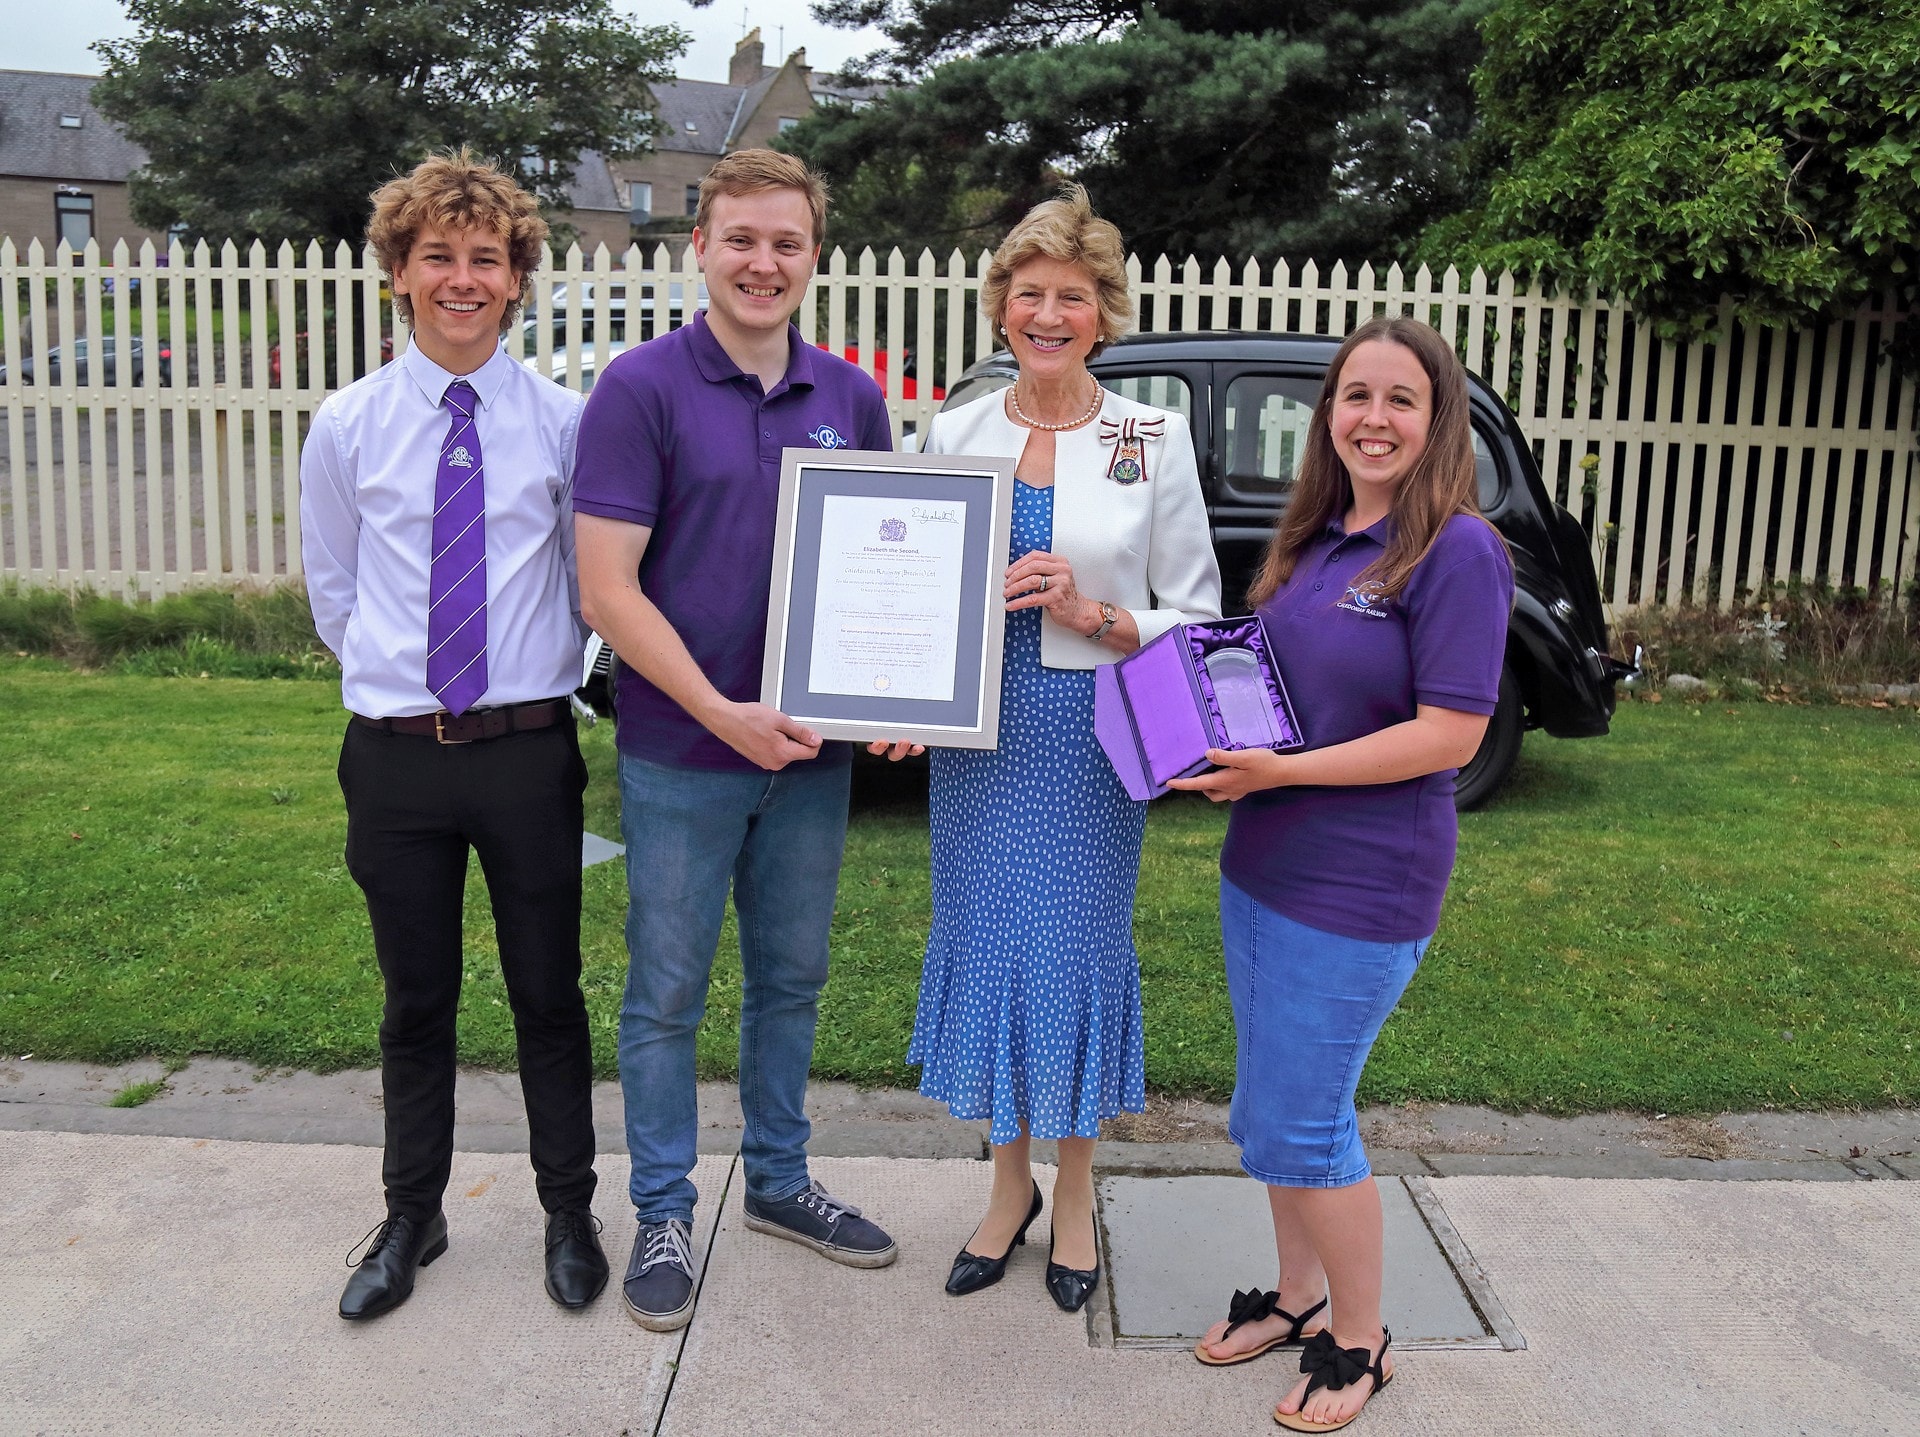 Volunteers being presented with the Queen's Award for Voluntary Service by the Lord Lieutenant of Angus in July 2019.